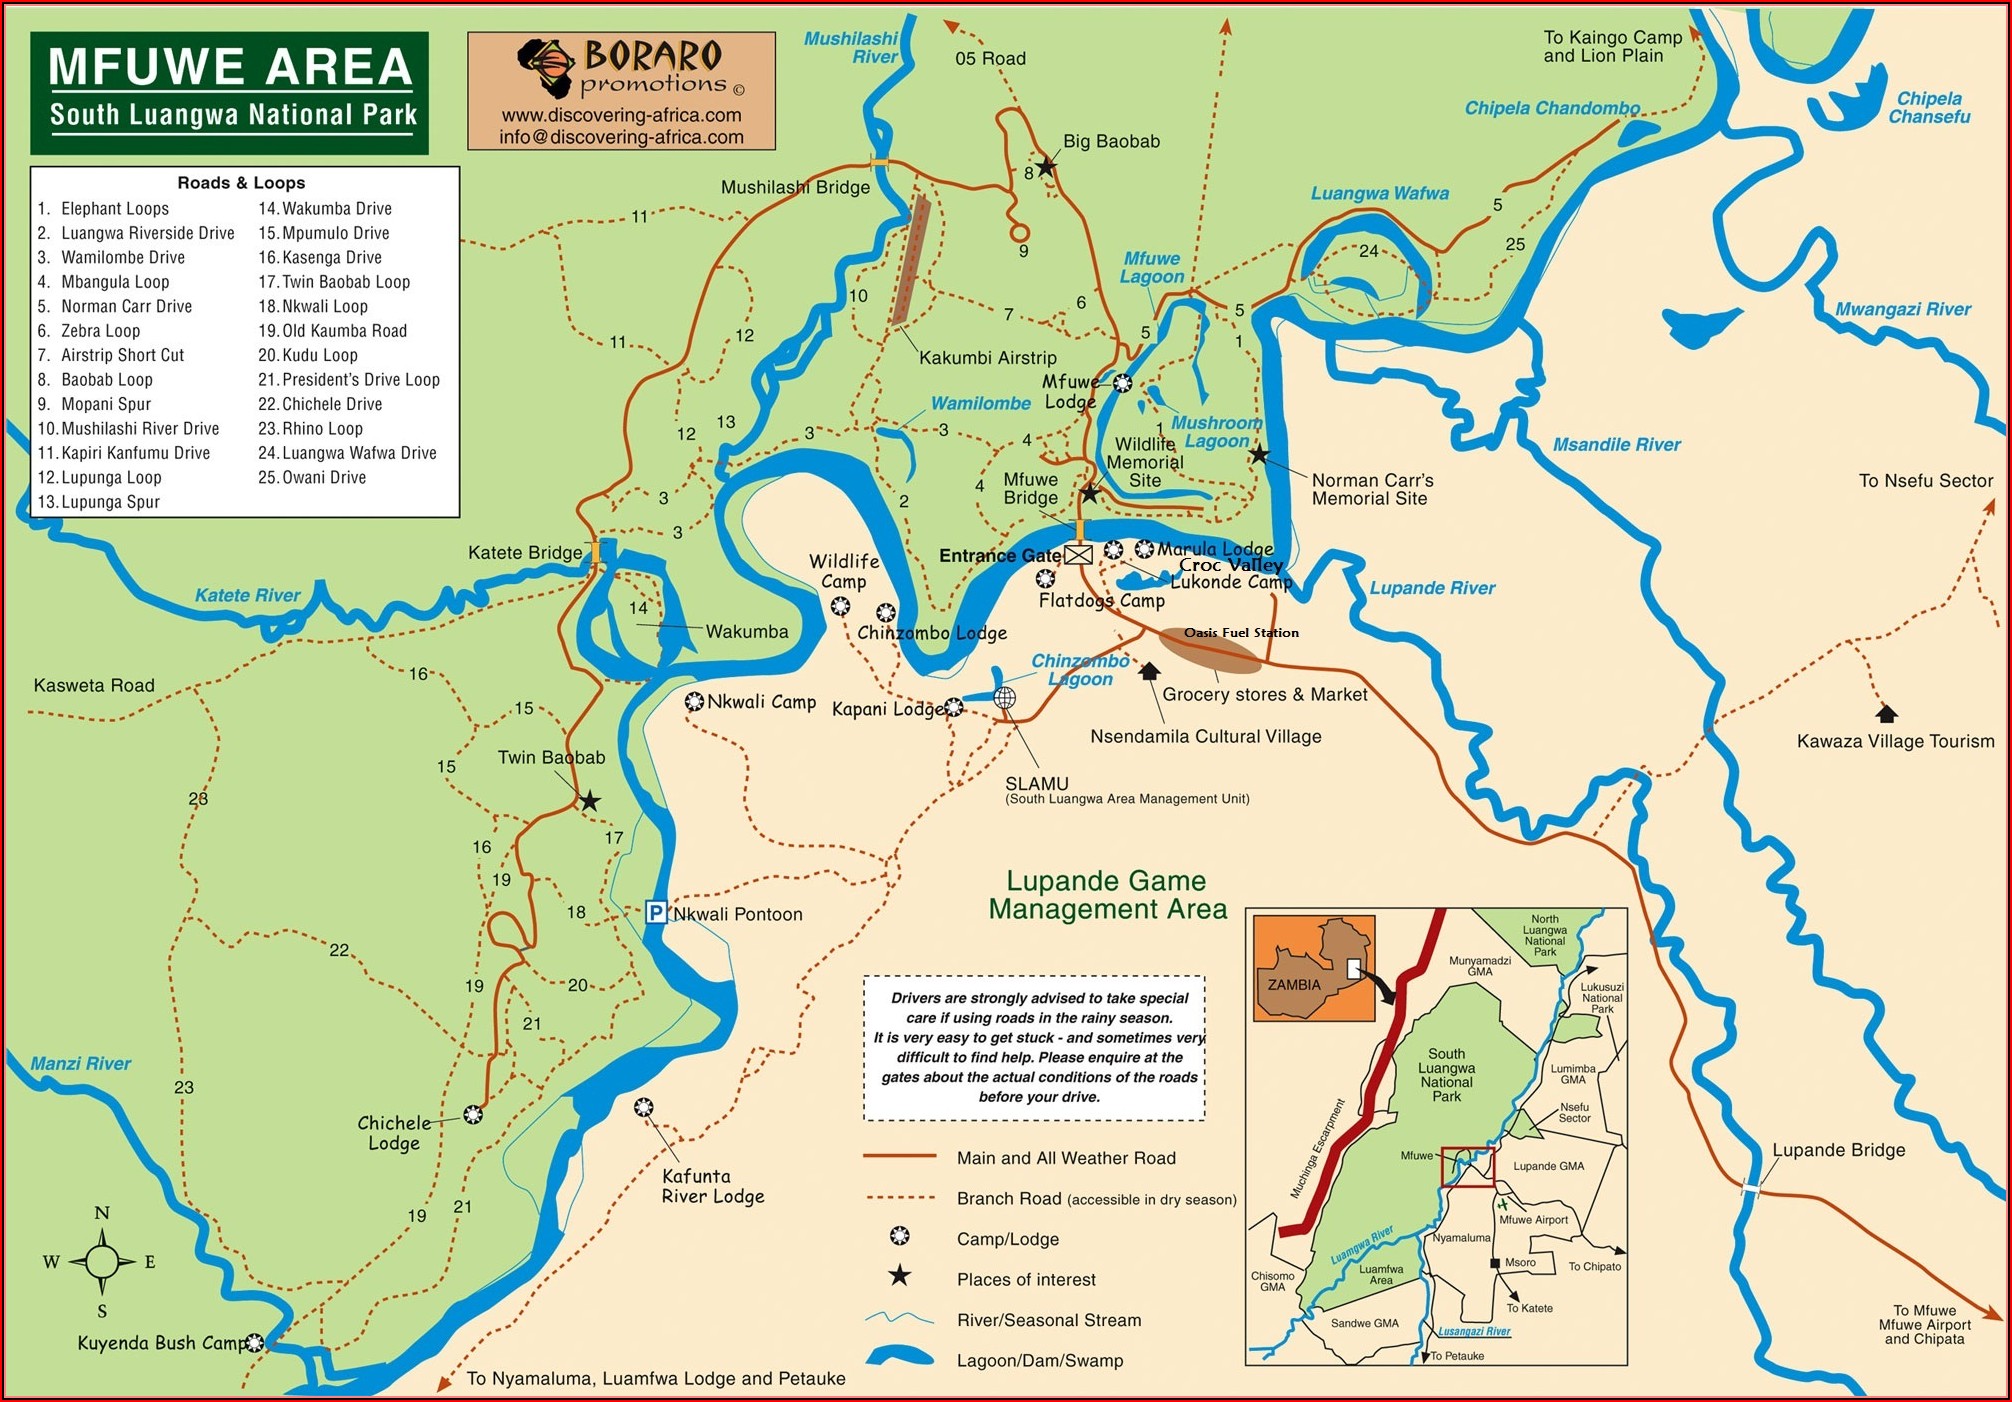 South Luangwa National Park Lodges Map